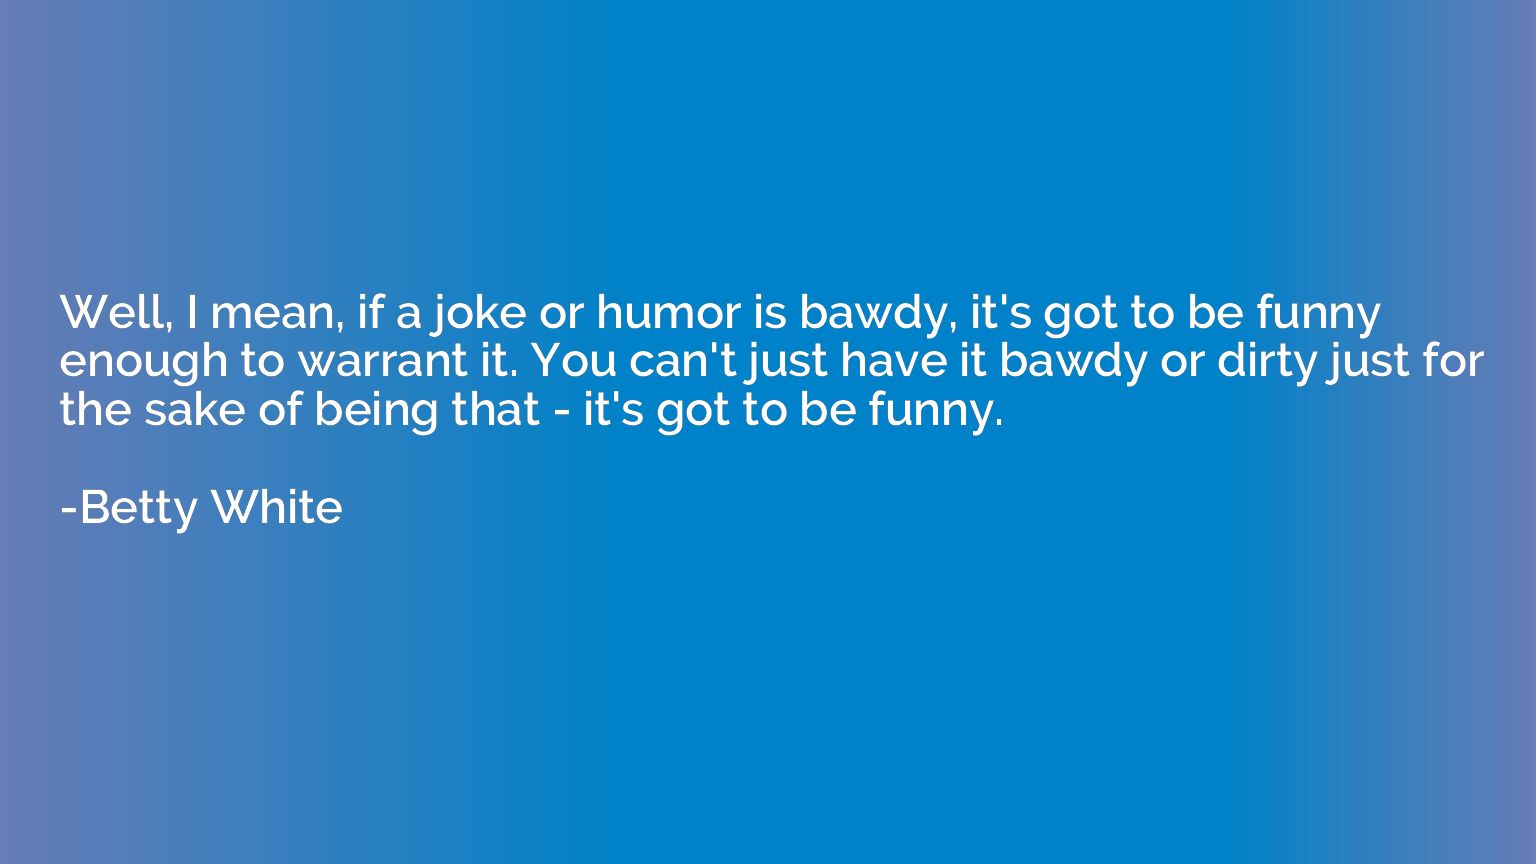 Well, I mean, if a joke or humor is bawdy, it's got to be fu